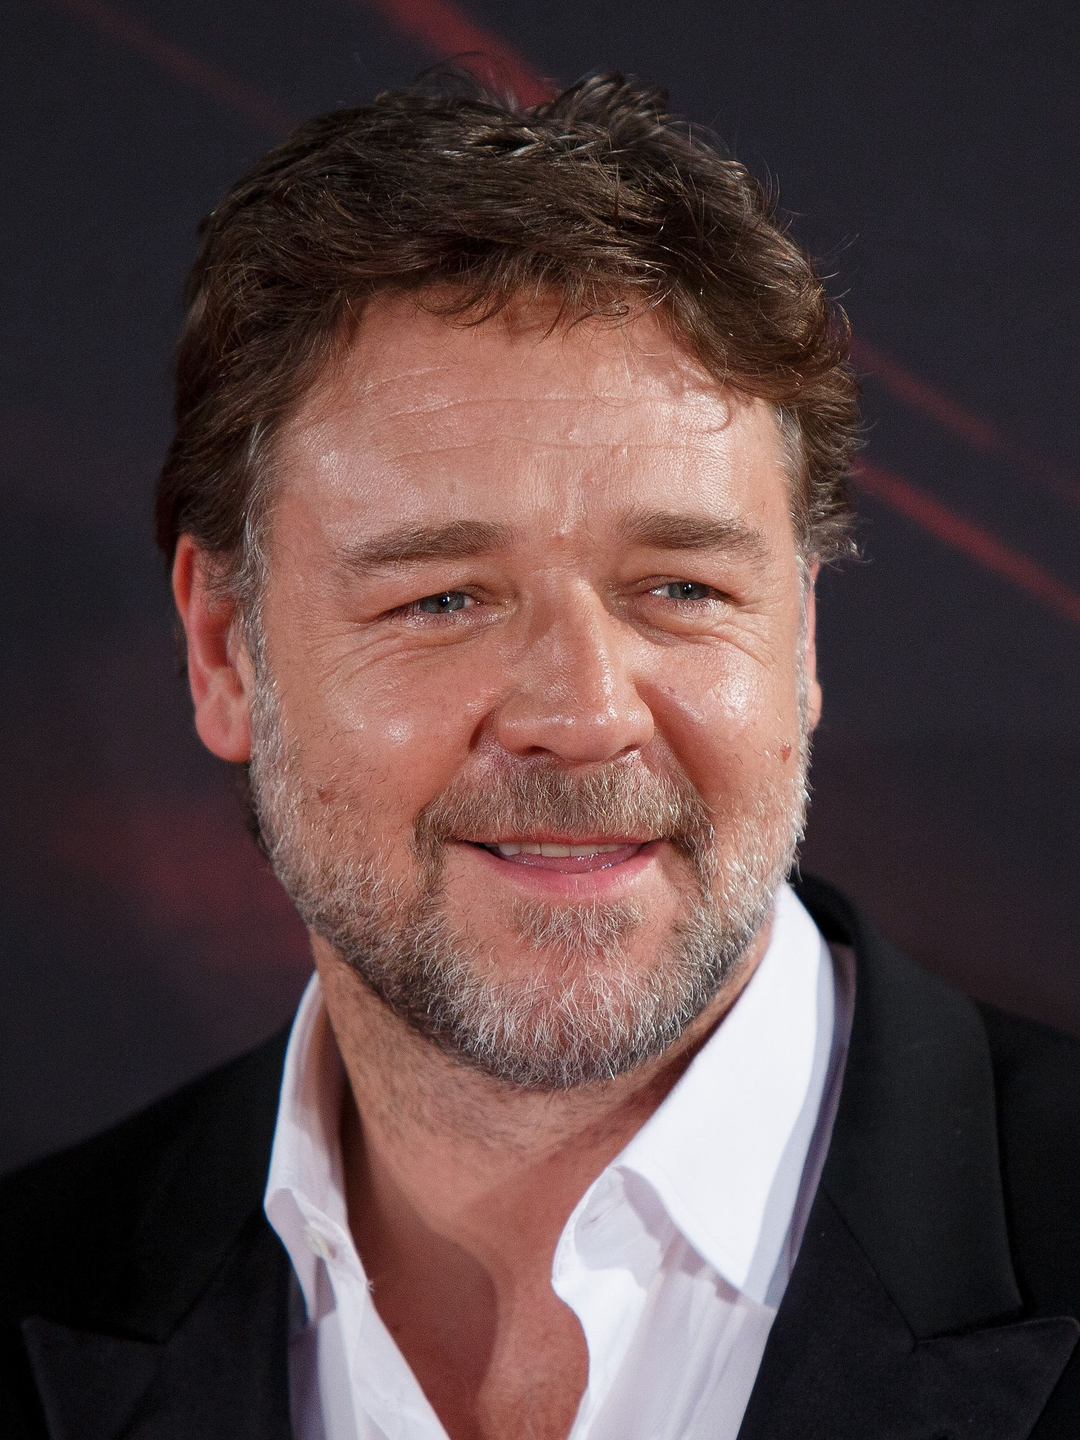 Russell Crowe young age